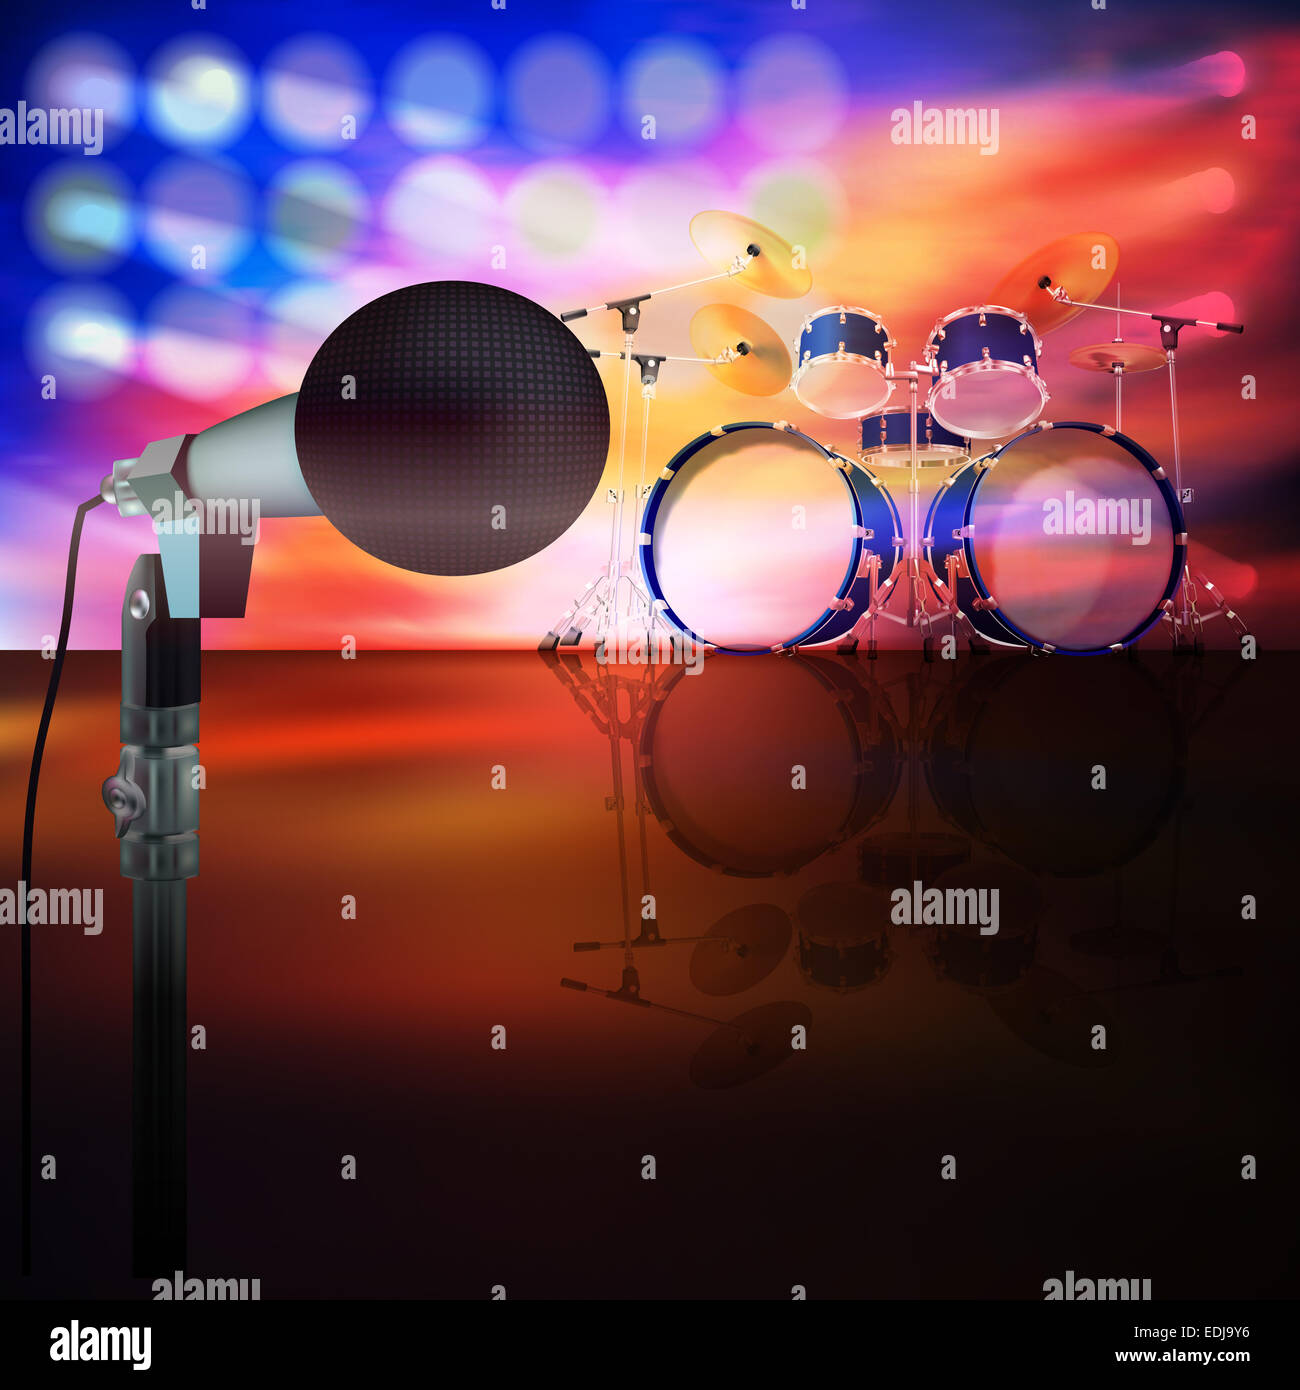 abstract music background with drum kit and microphone on stage Stock Photo